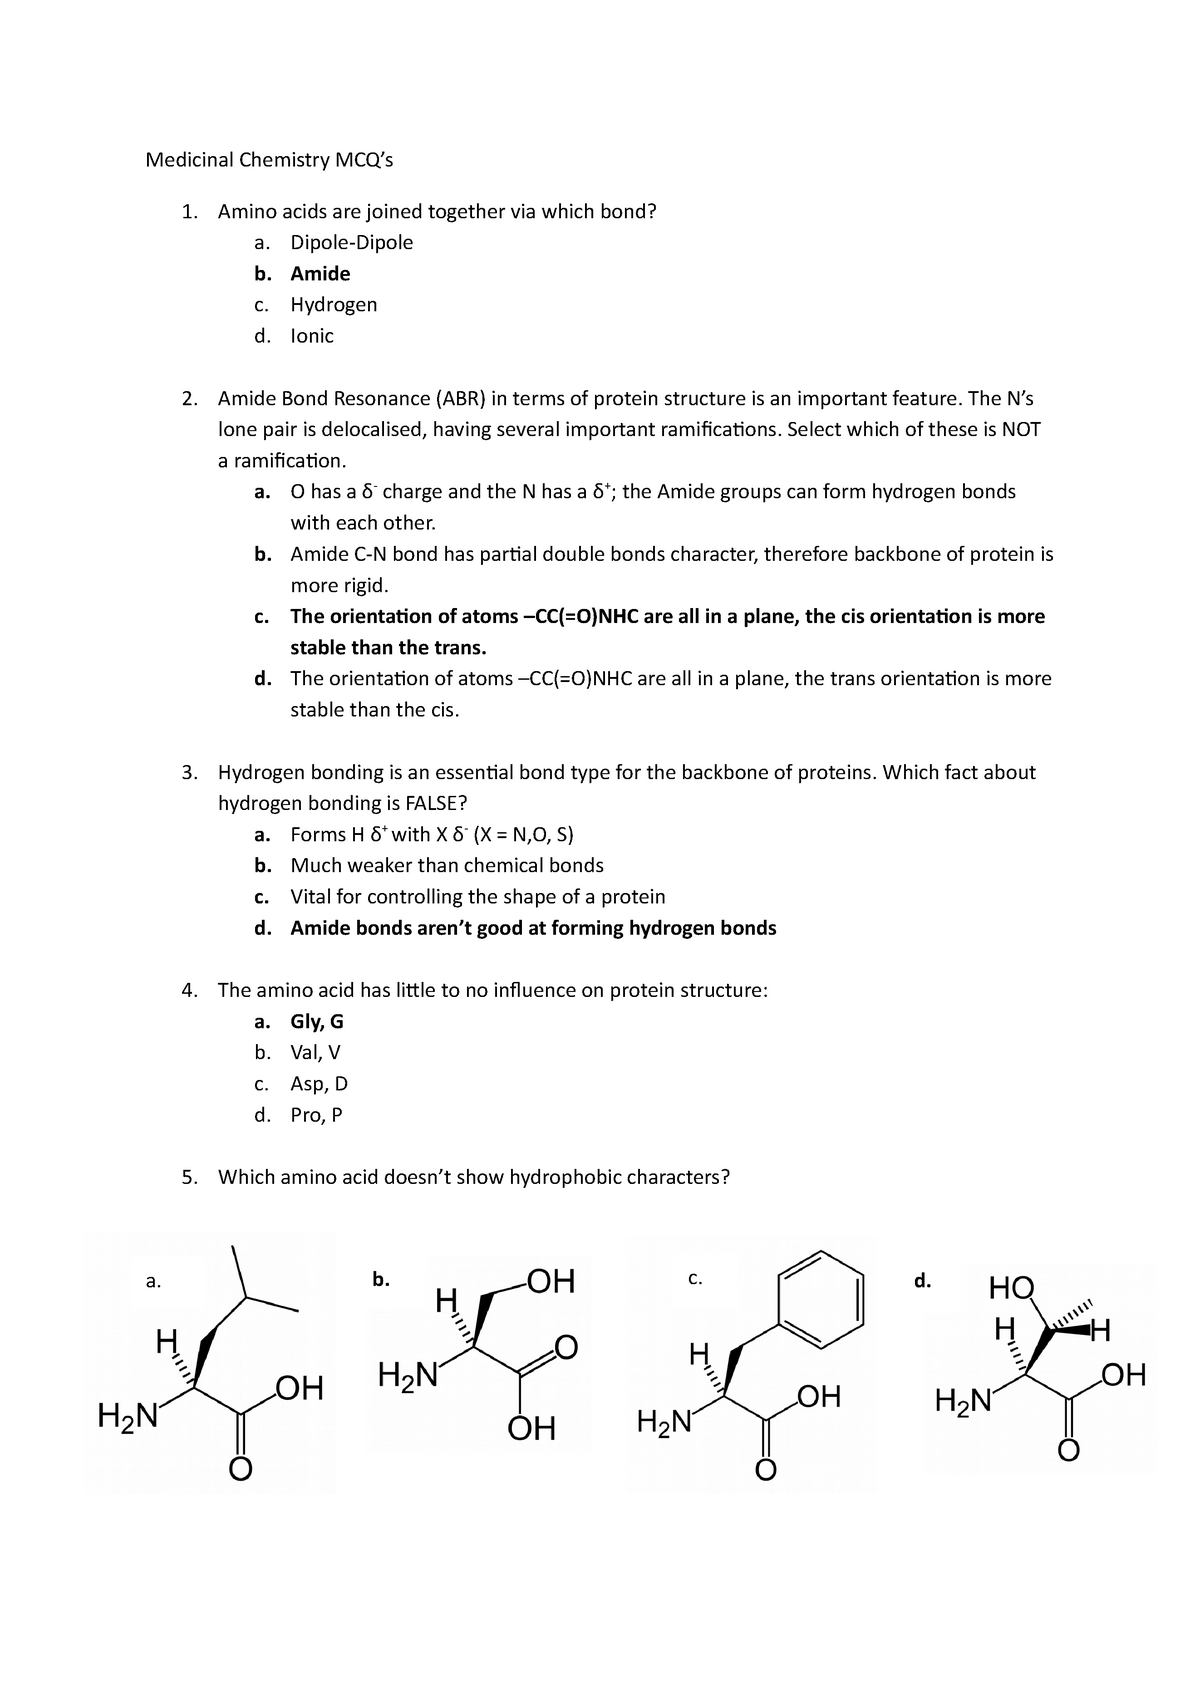 Tutorial Work 217 Questions And Answers Mcq S Medicinal Chemistry Mcq Amino Studocu